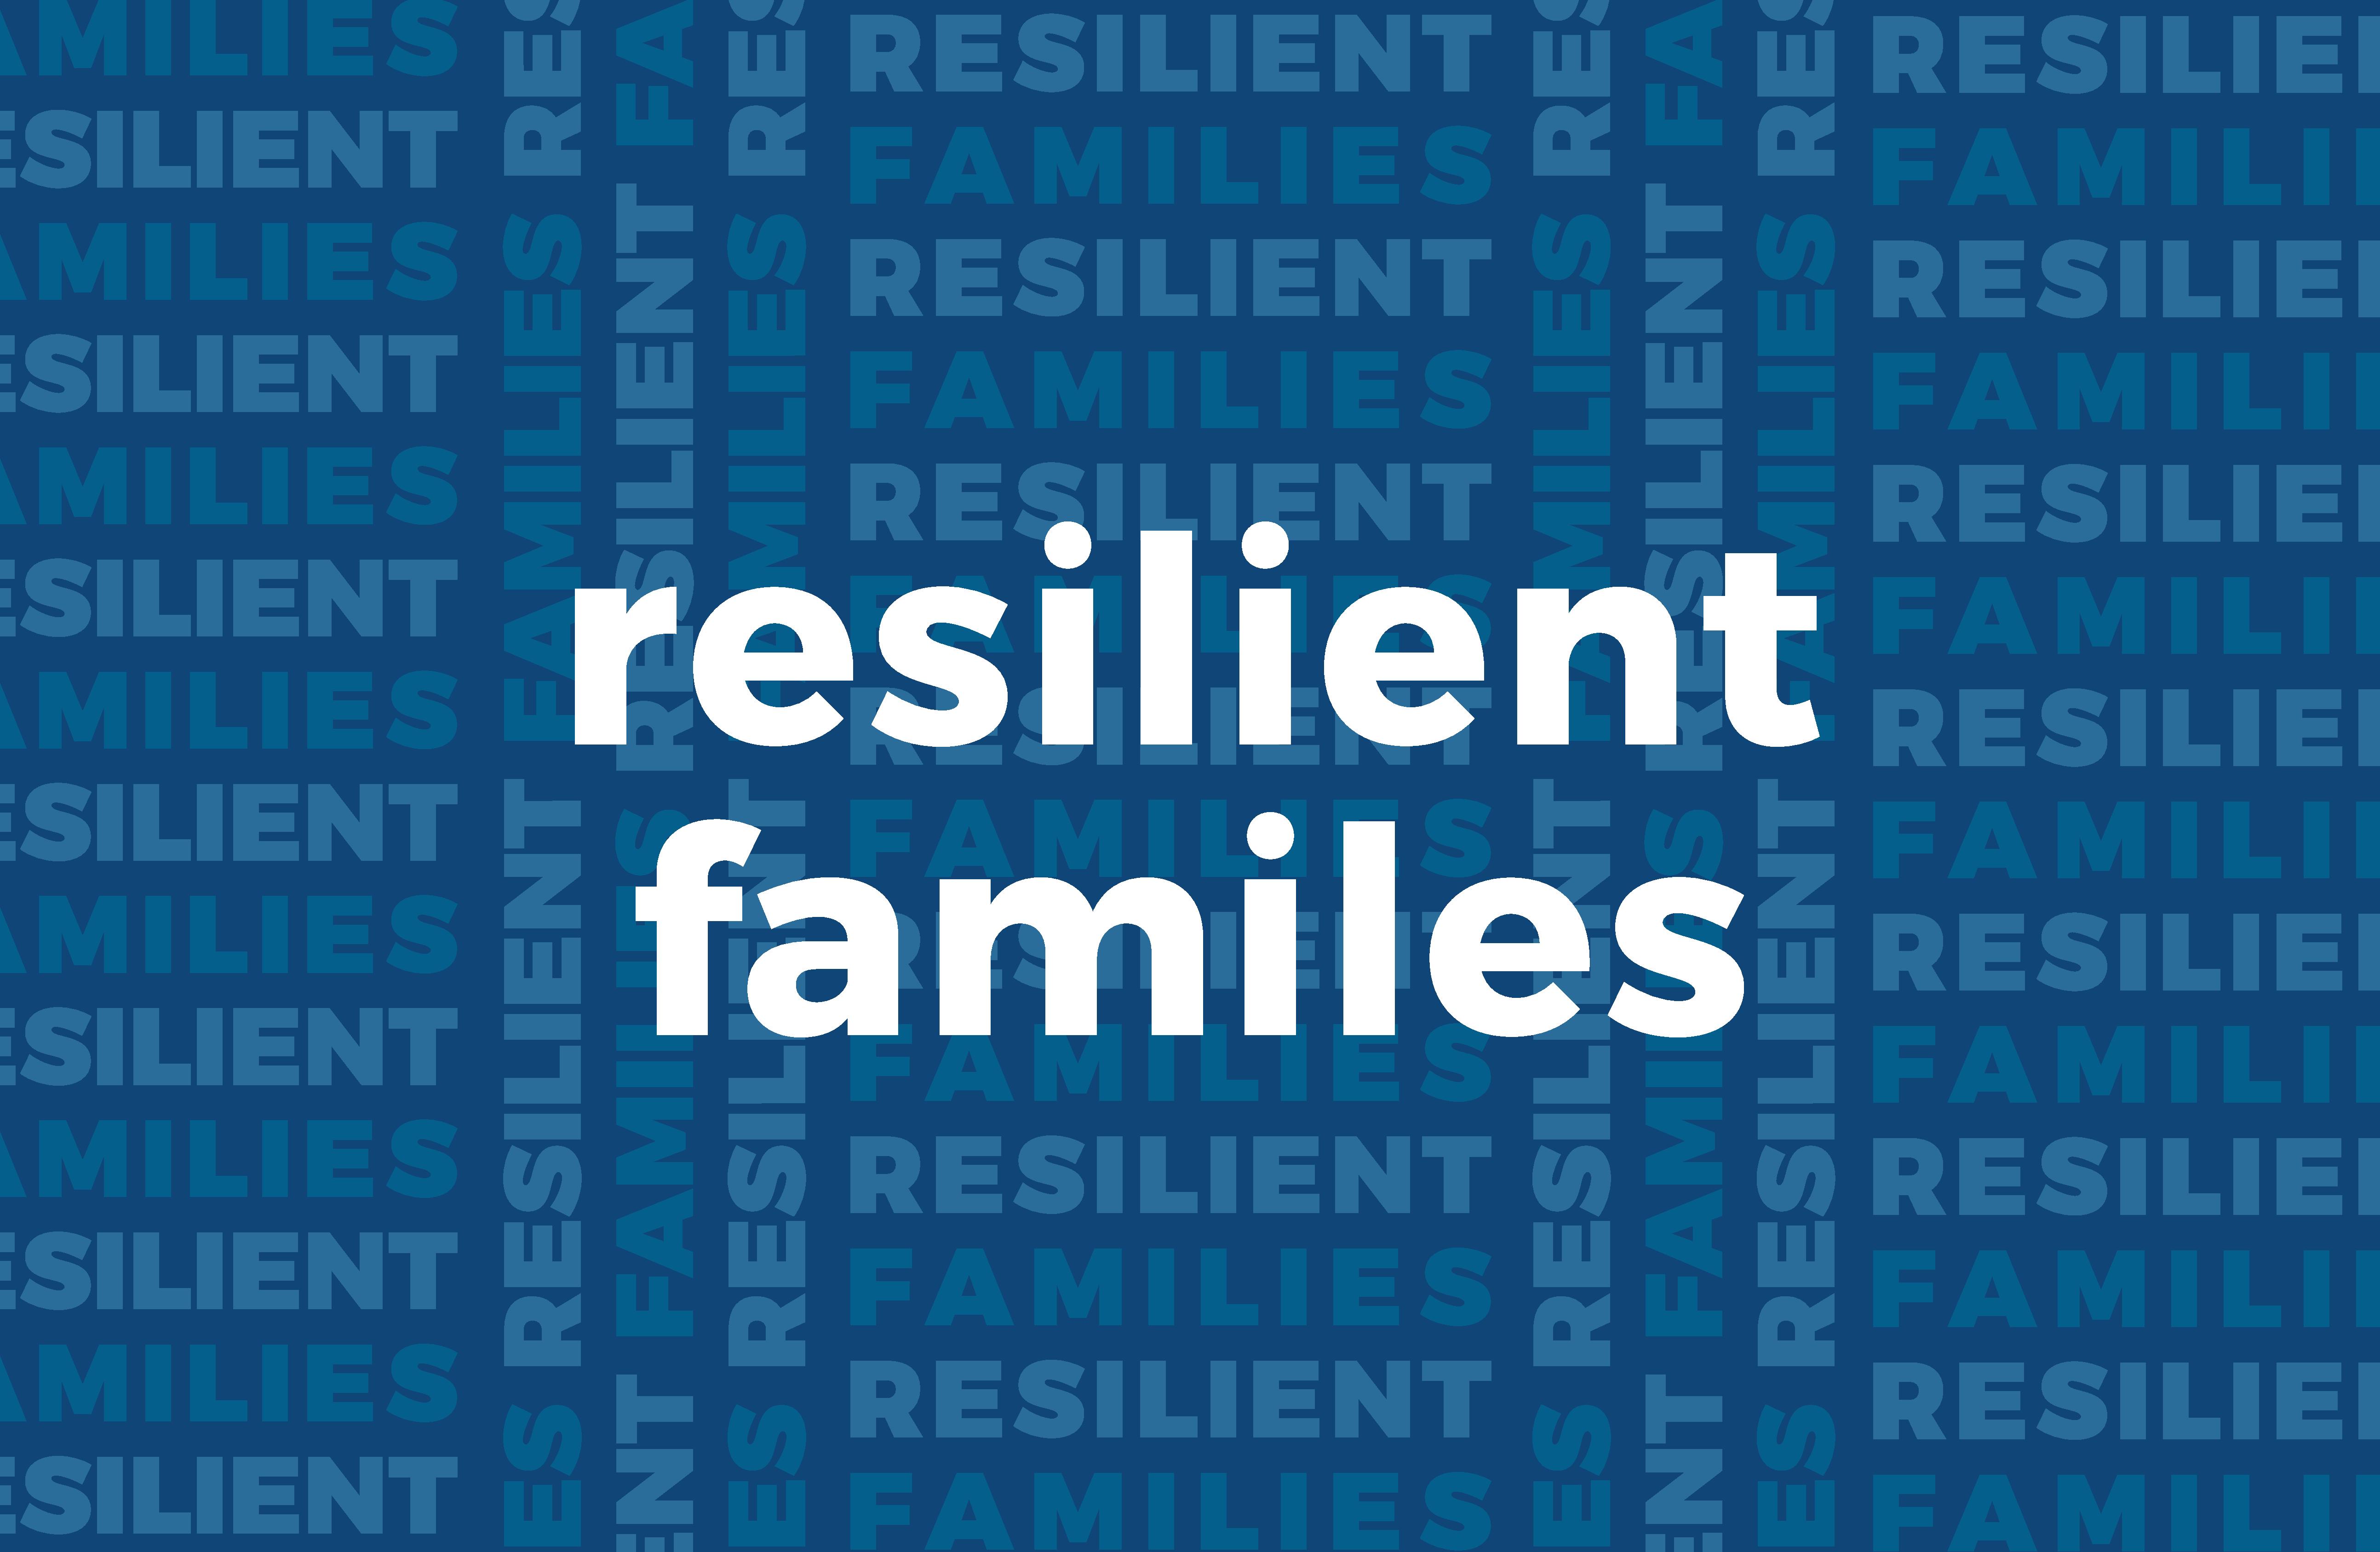 Resilient families